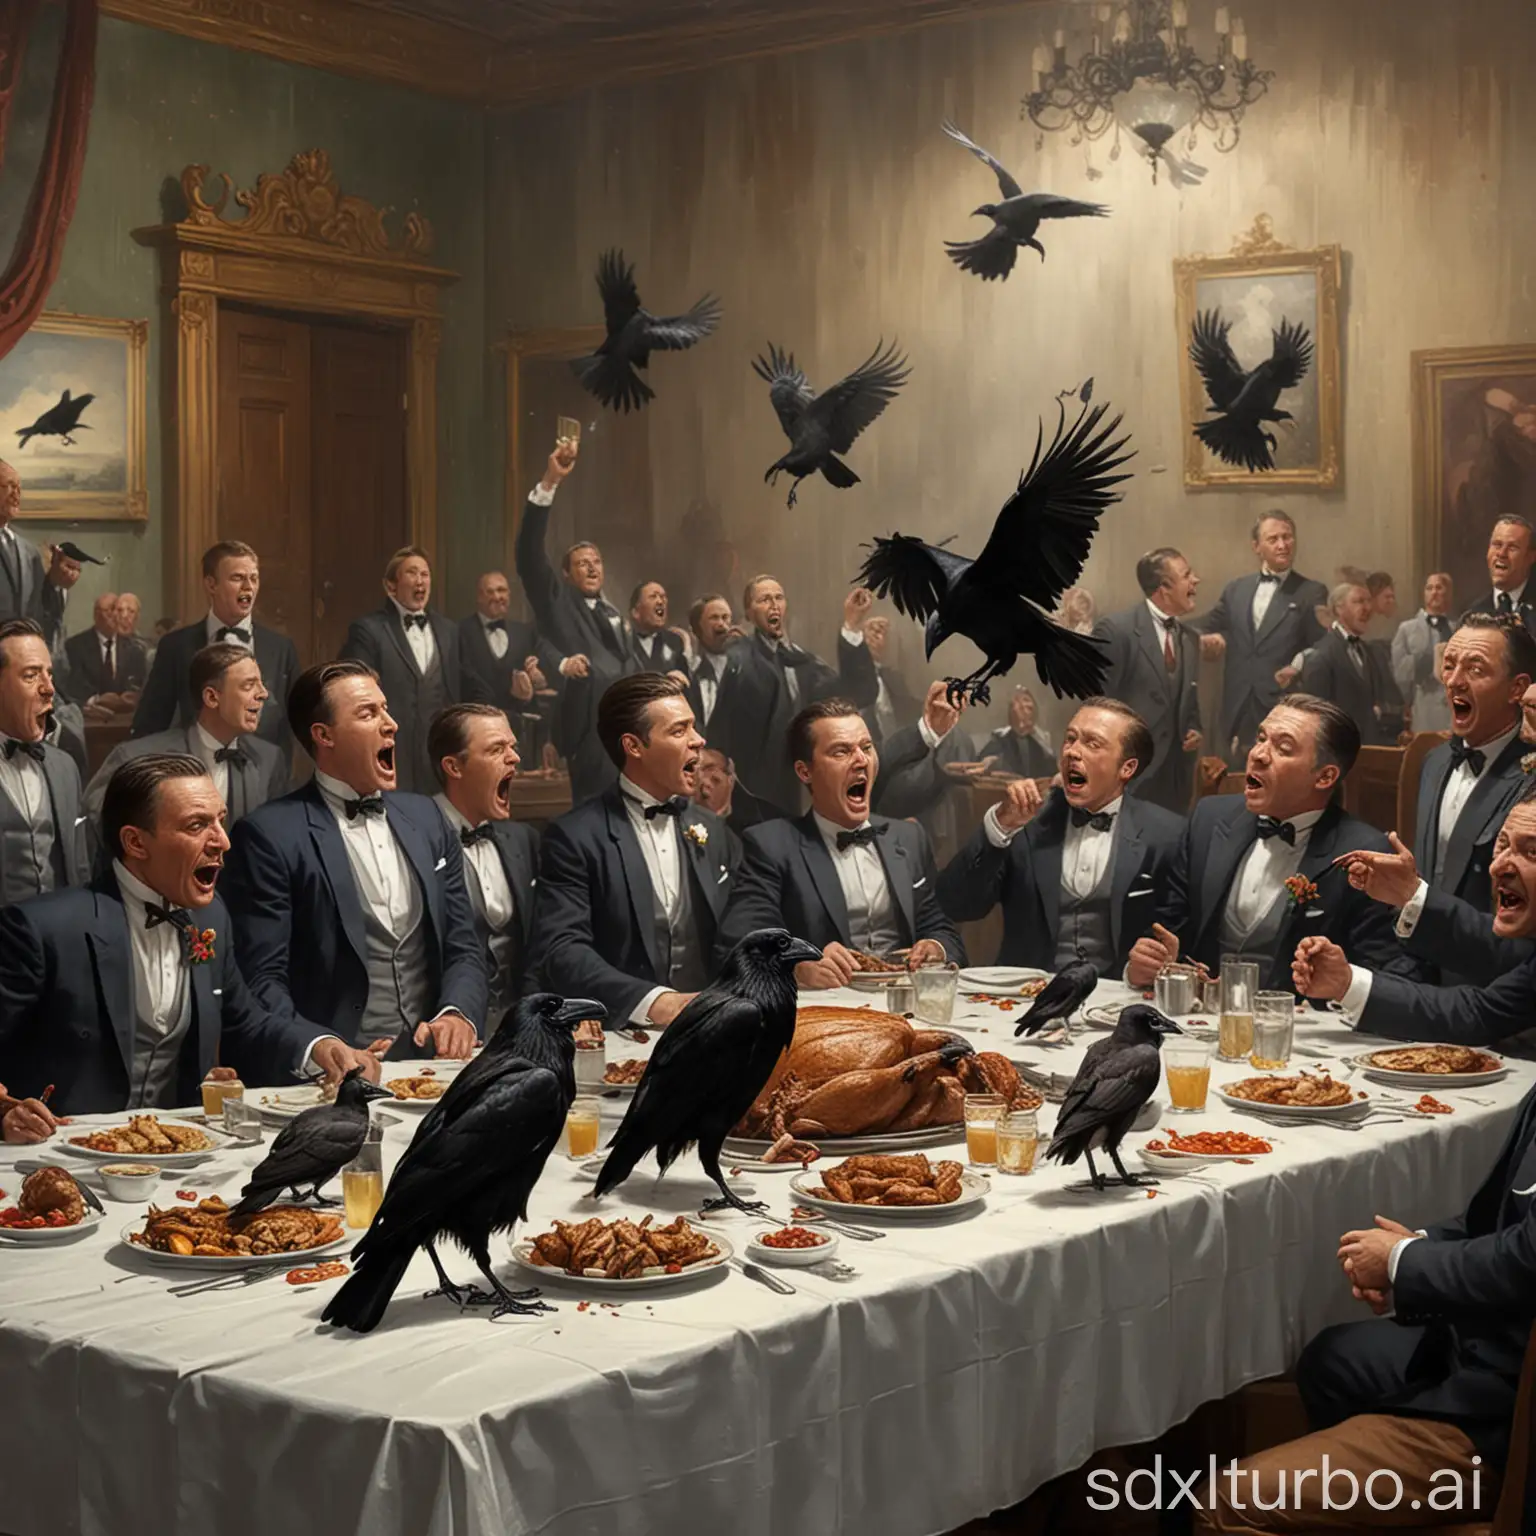 Crow-and-Vultures-Feasting-on-Meal-amidst-Shouting-Men-in-Suits